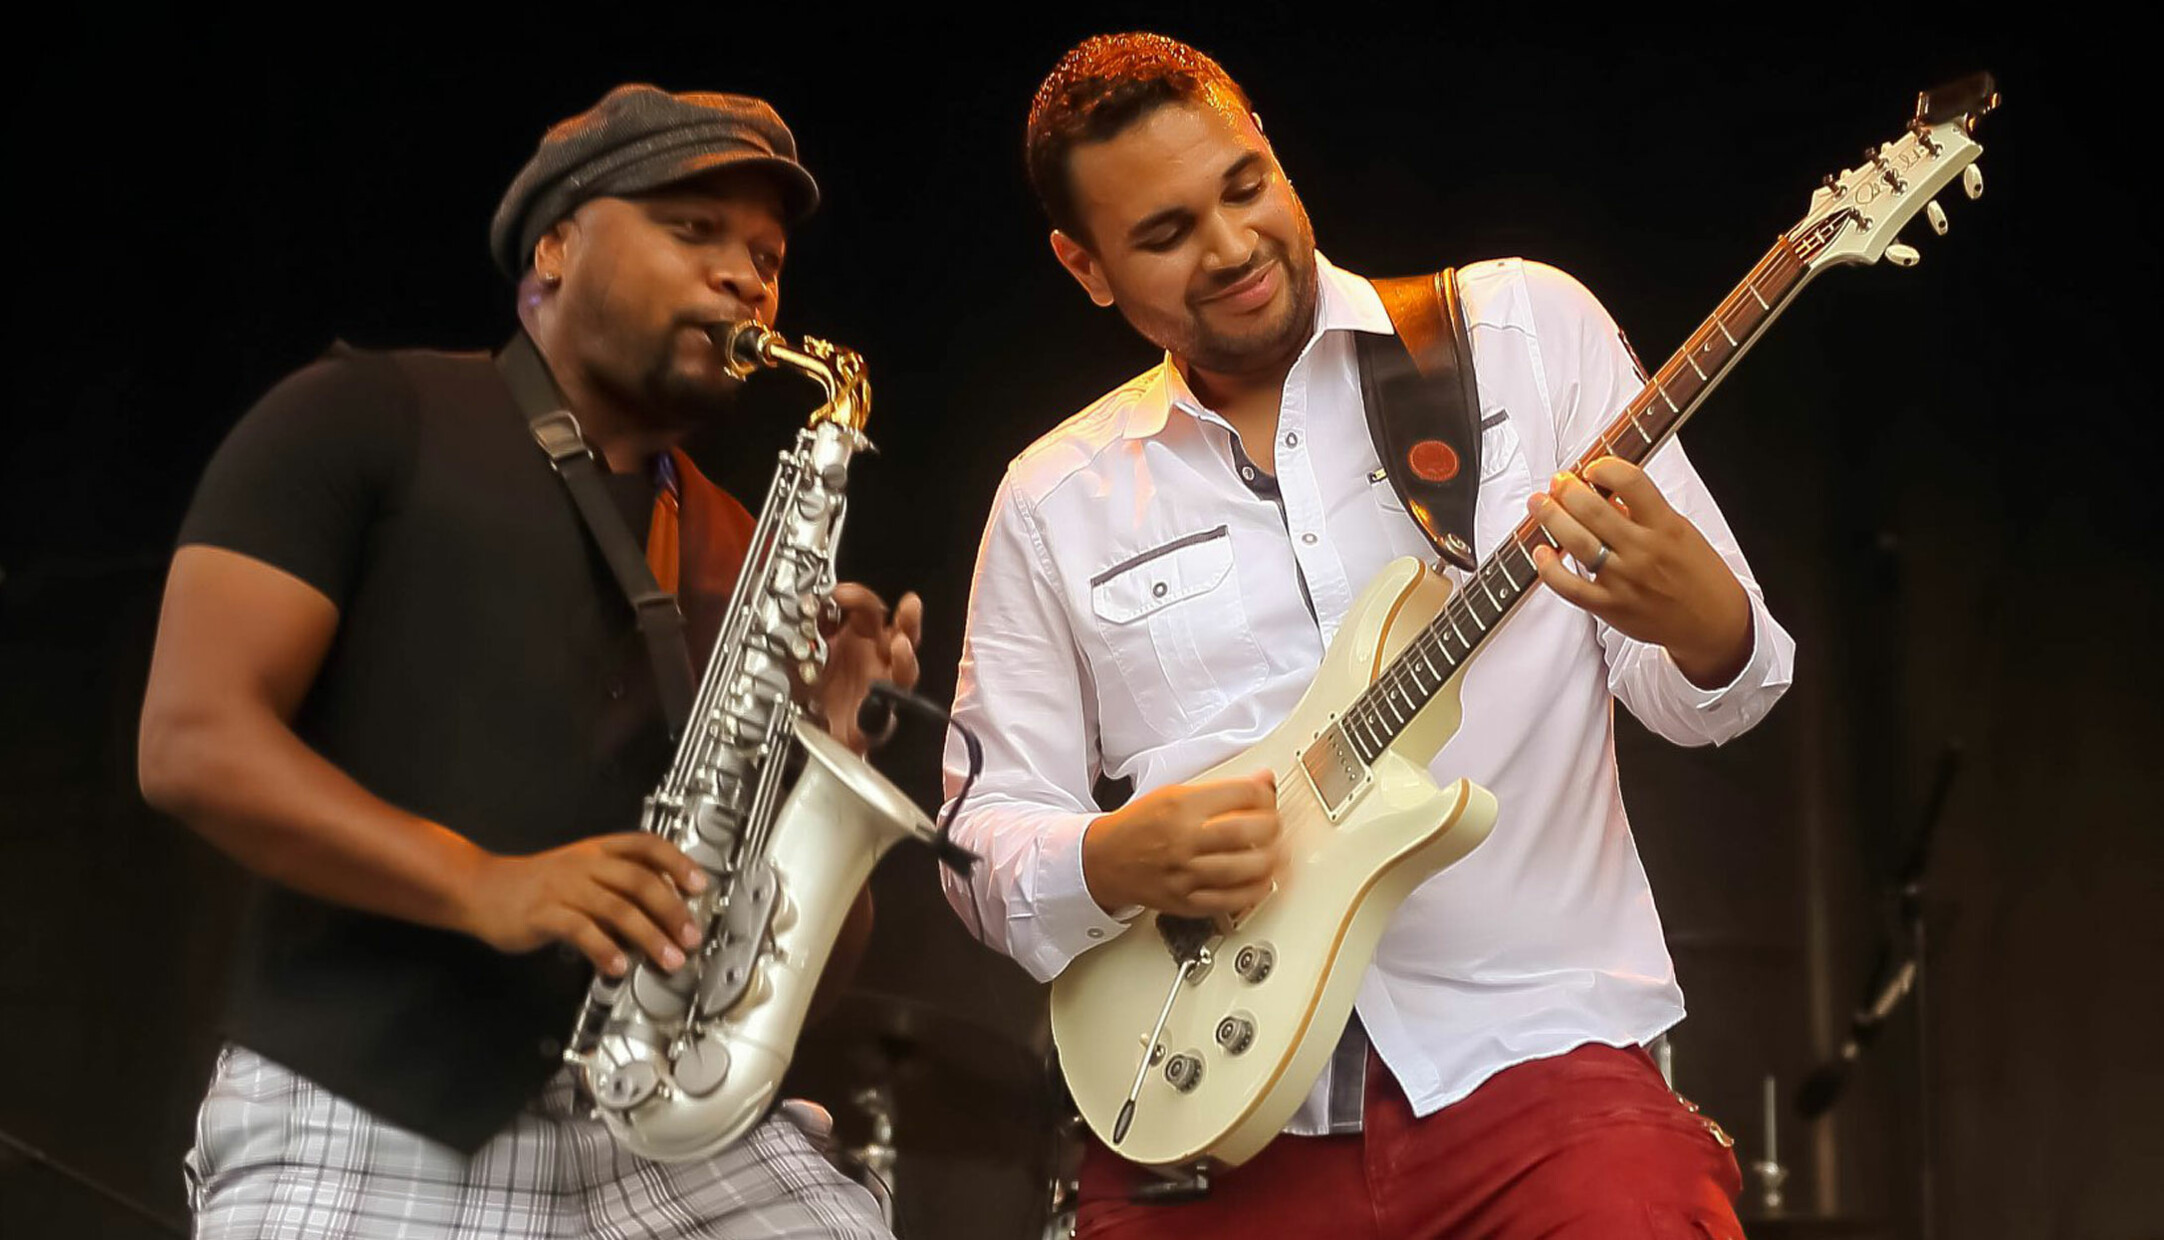 A saxophone player and guitar player featured at the Brass City Jazz Fest in Waterbury CT